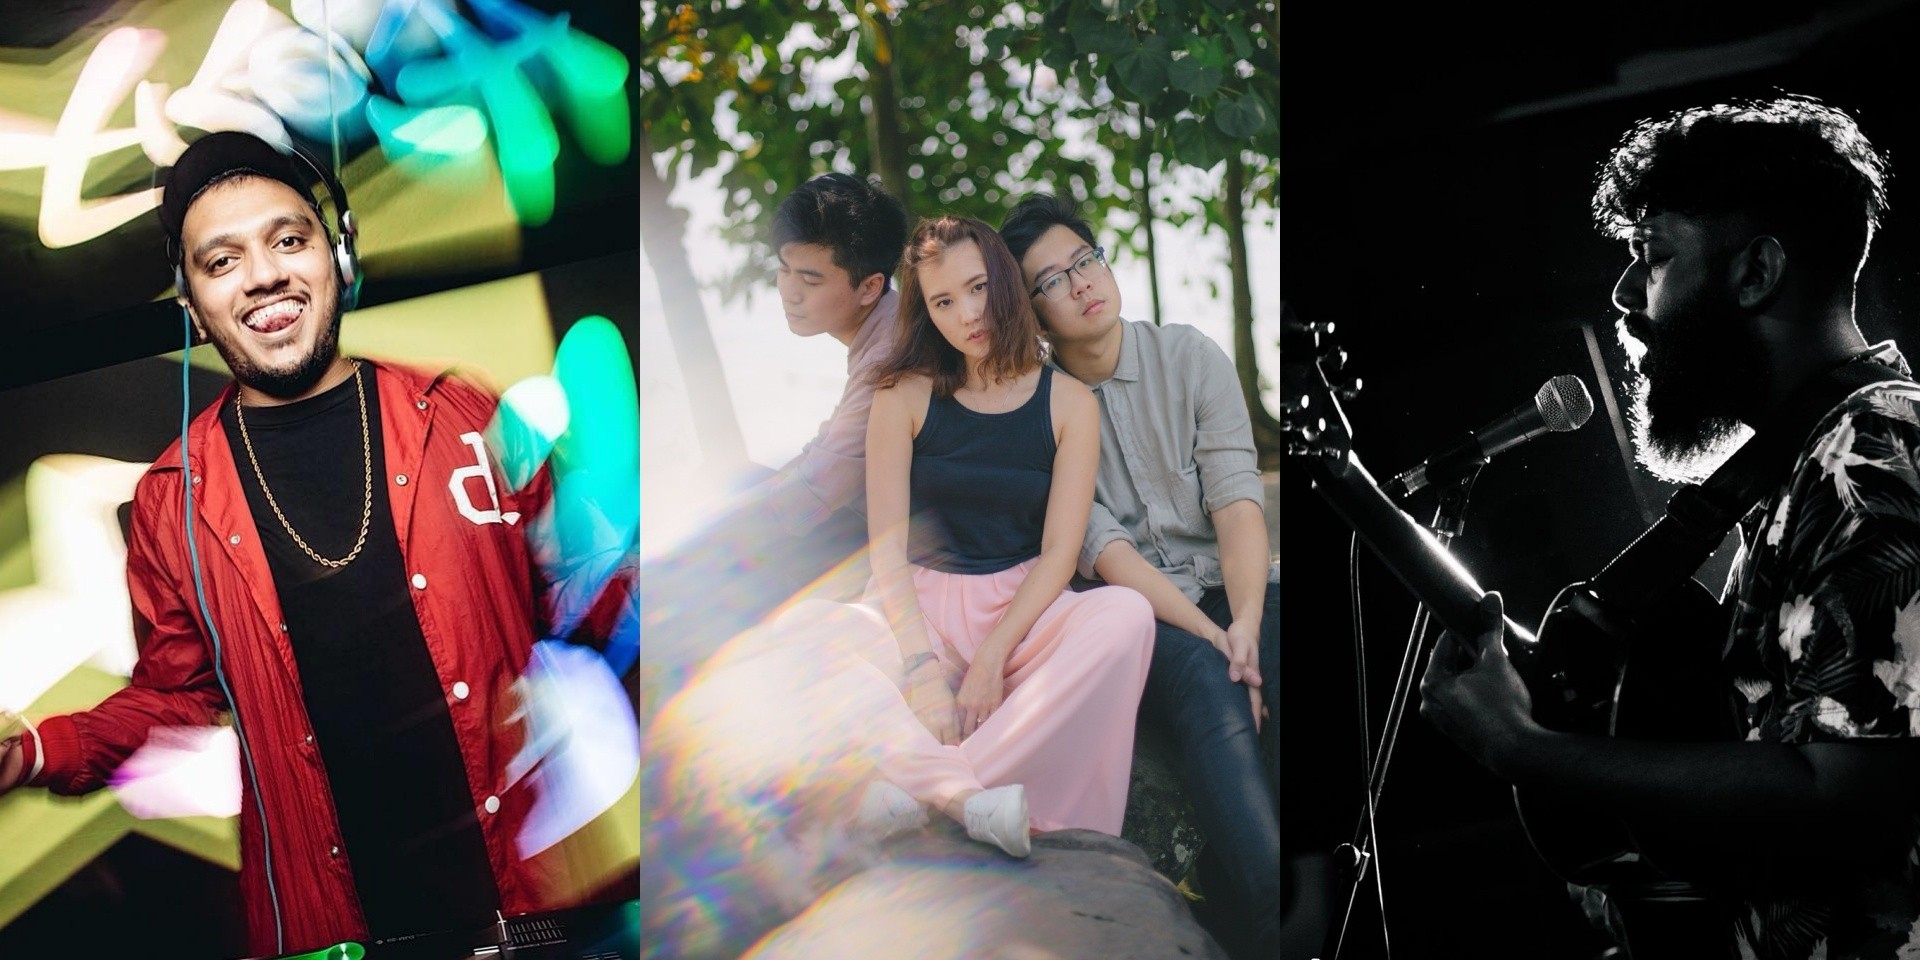 A guide to all the music acts performing at Street of Clans 2019